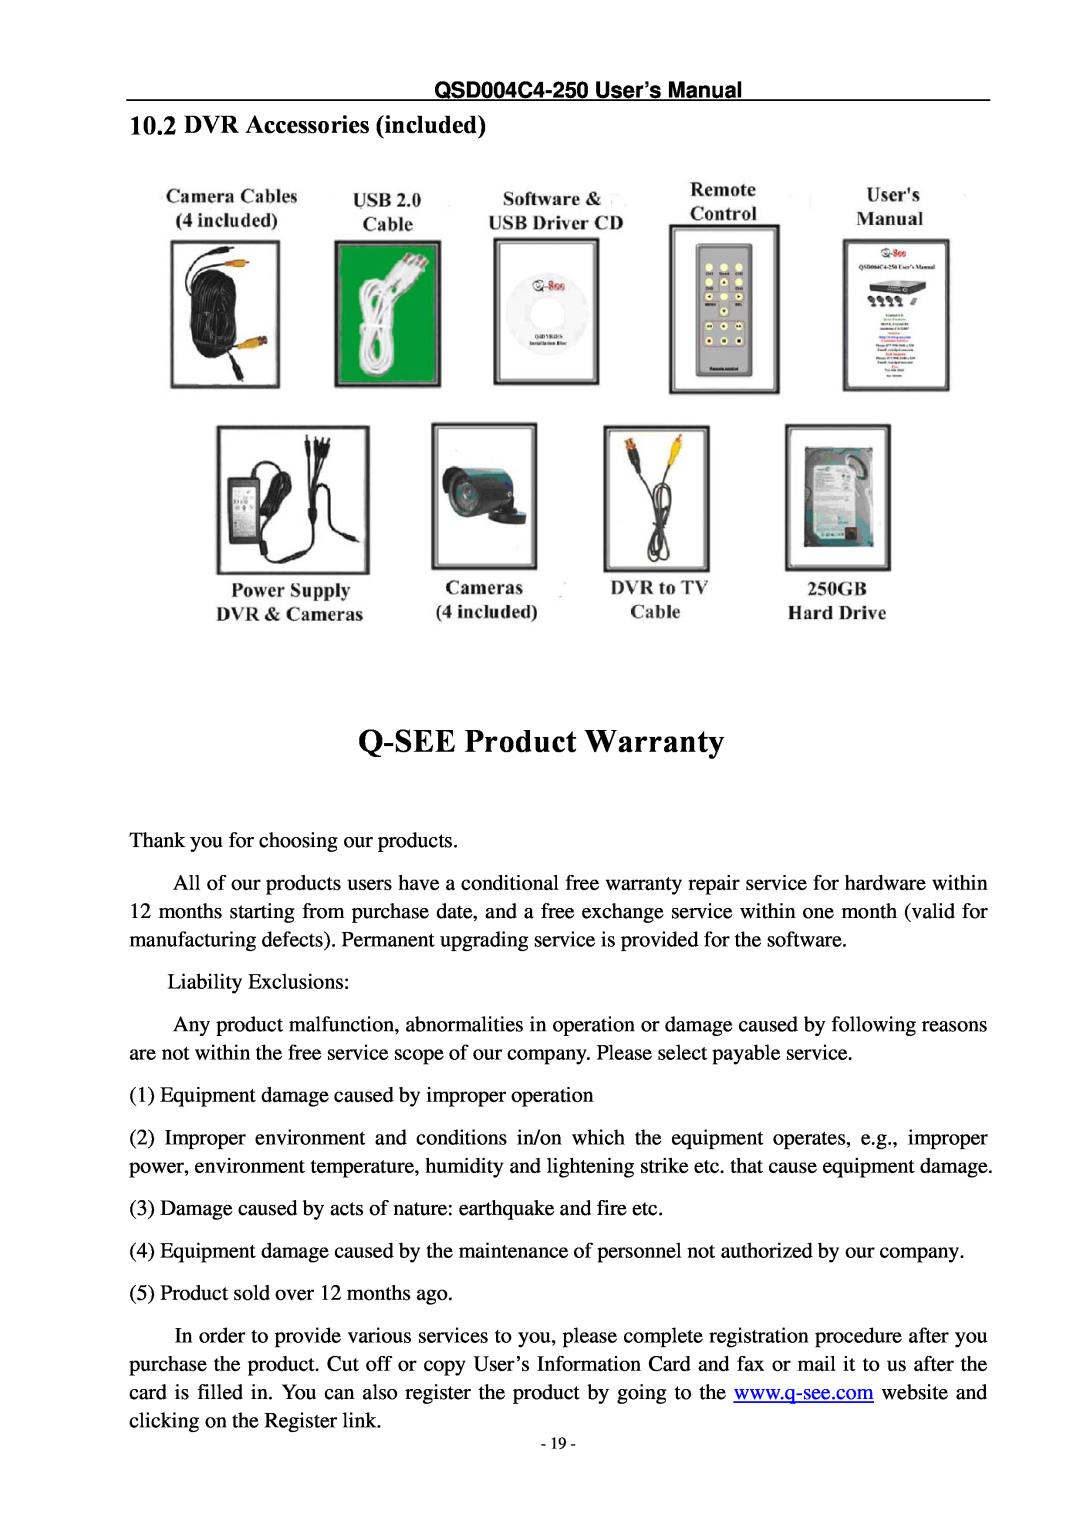 Q-See QSD004C4-250 manual Q-SEEProduct Warranty, 10.2DVR Accessories included 